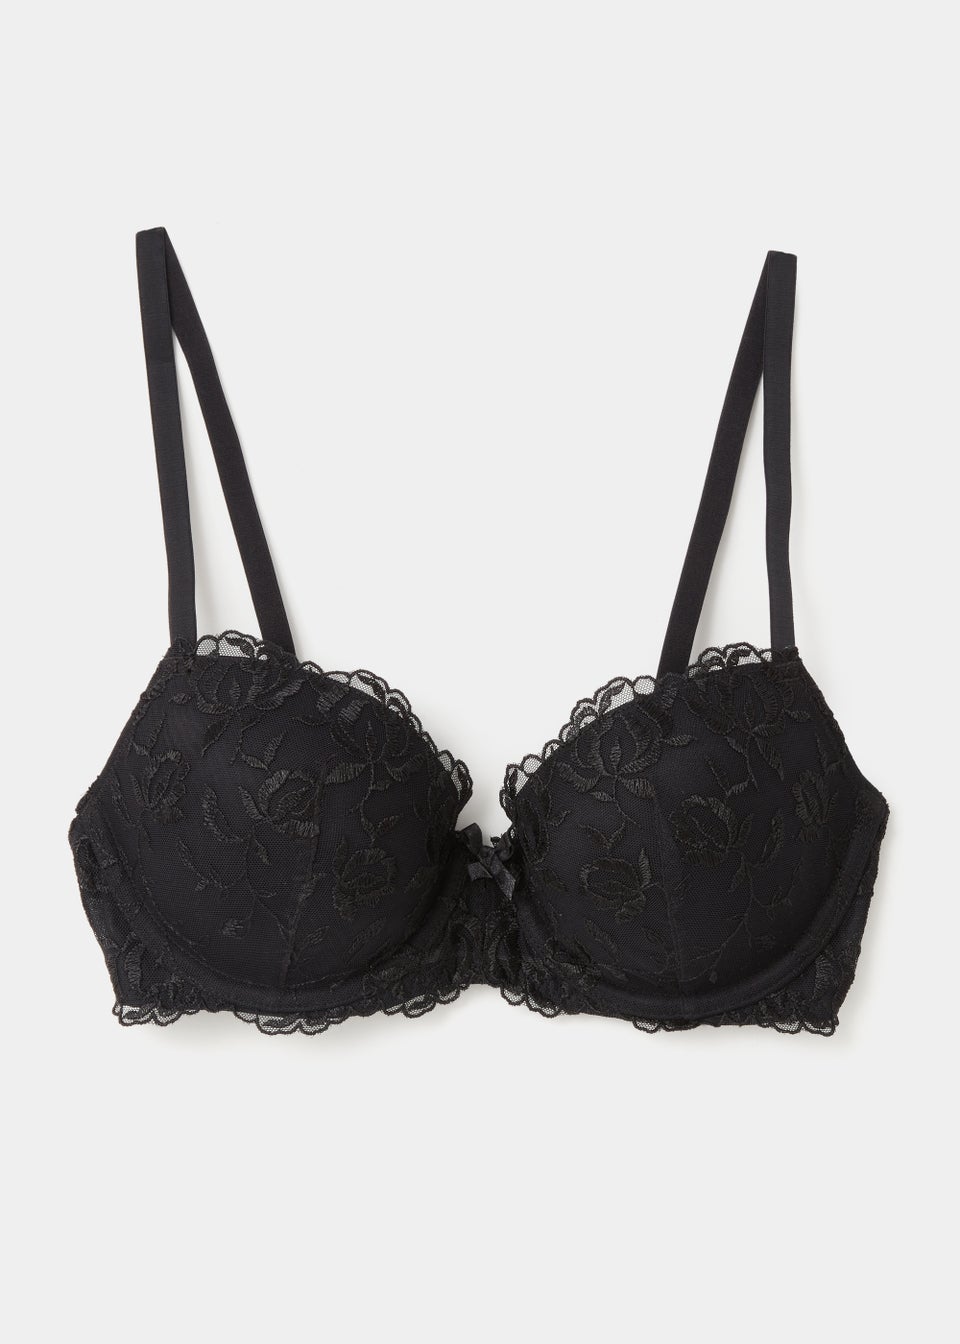 2 Pack Embroidered Lace Bras